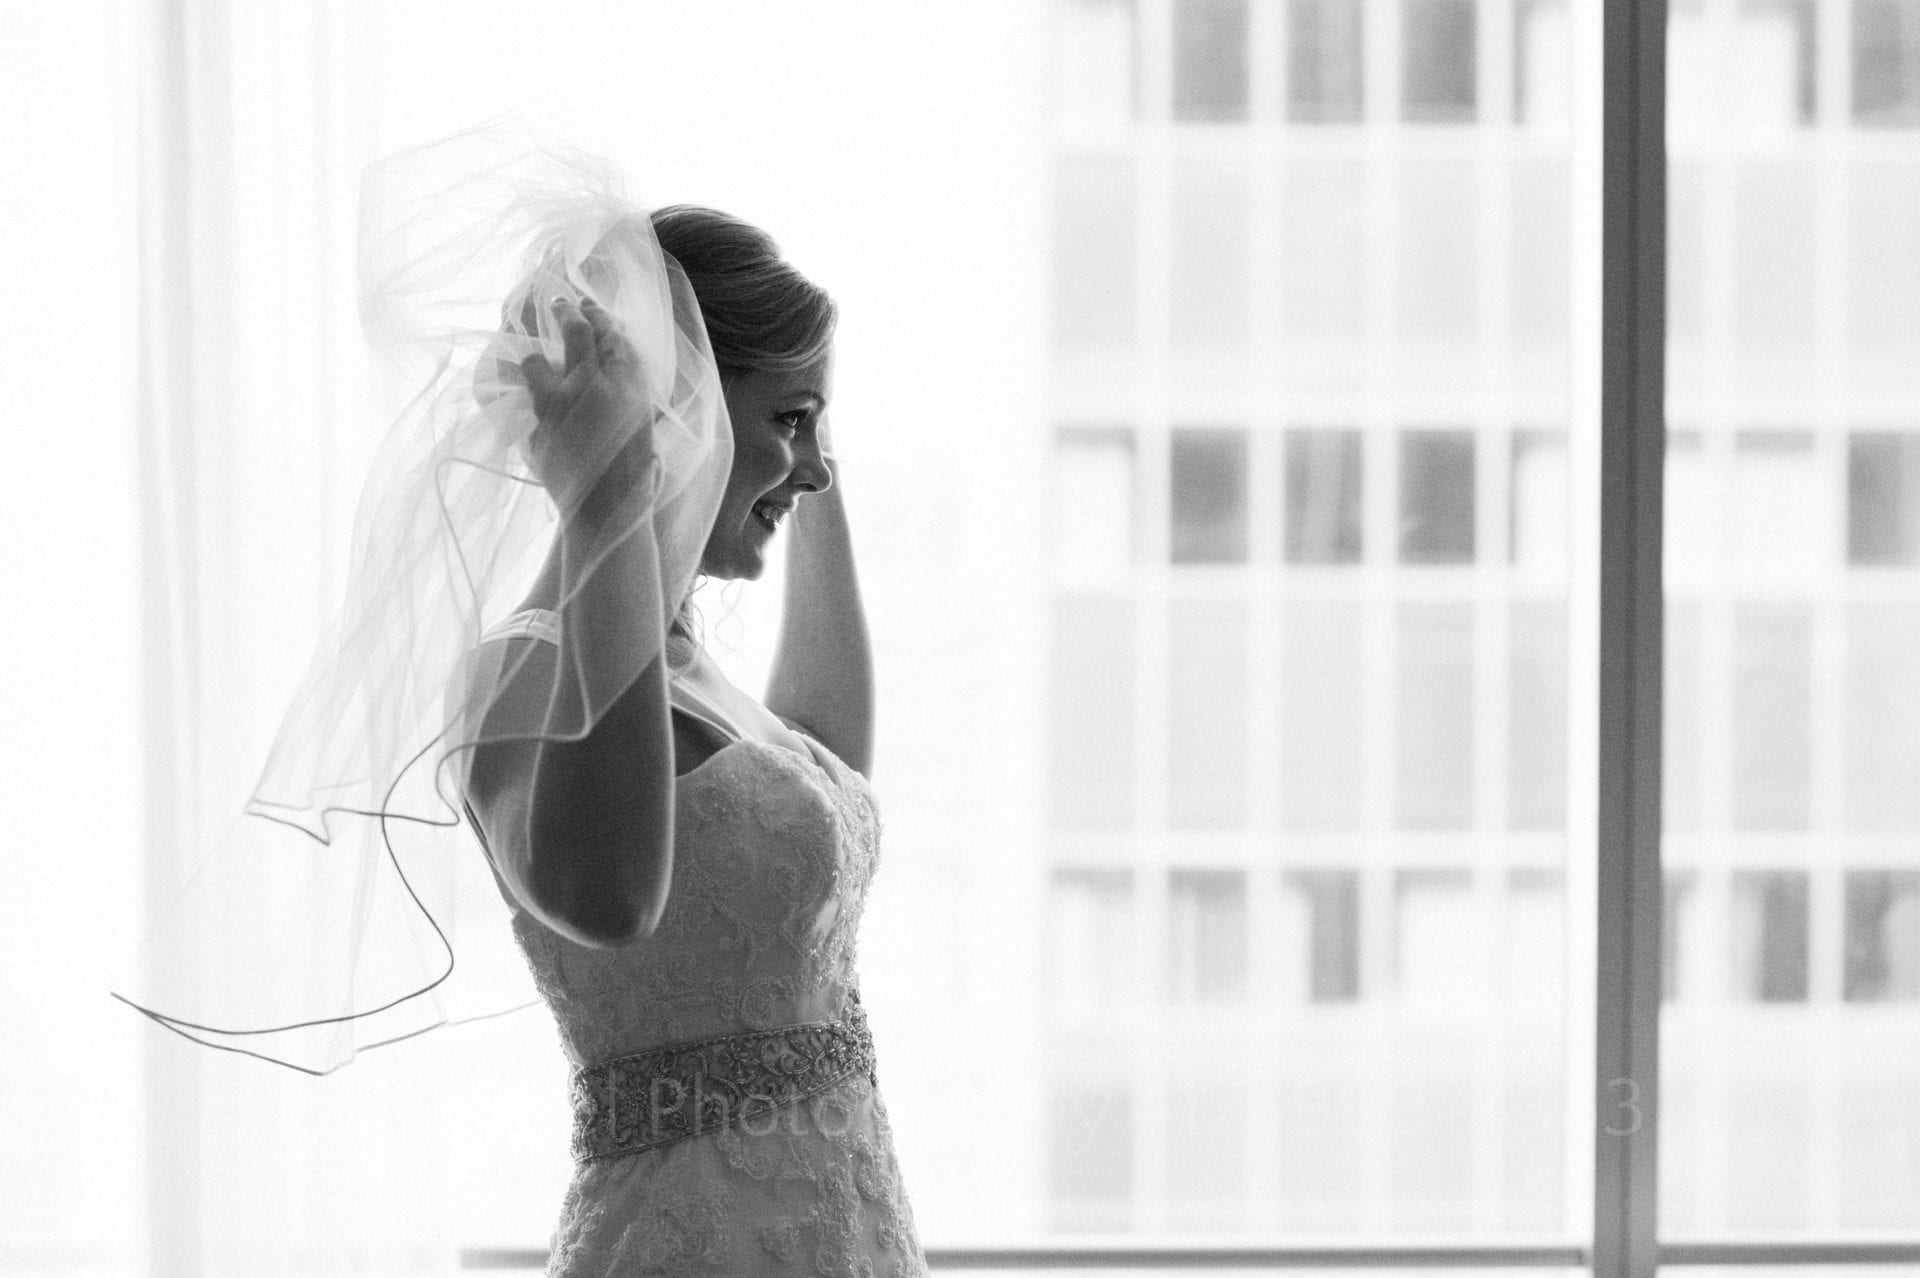 A bride smiles as she fluffs her veil in front of a large window Fairmont Hotel Pittsburgh Weddings.